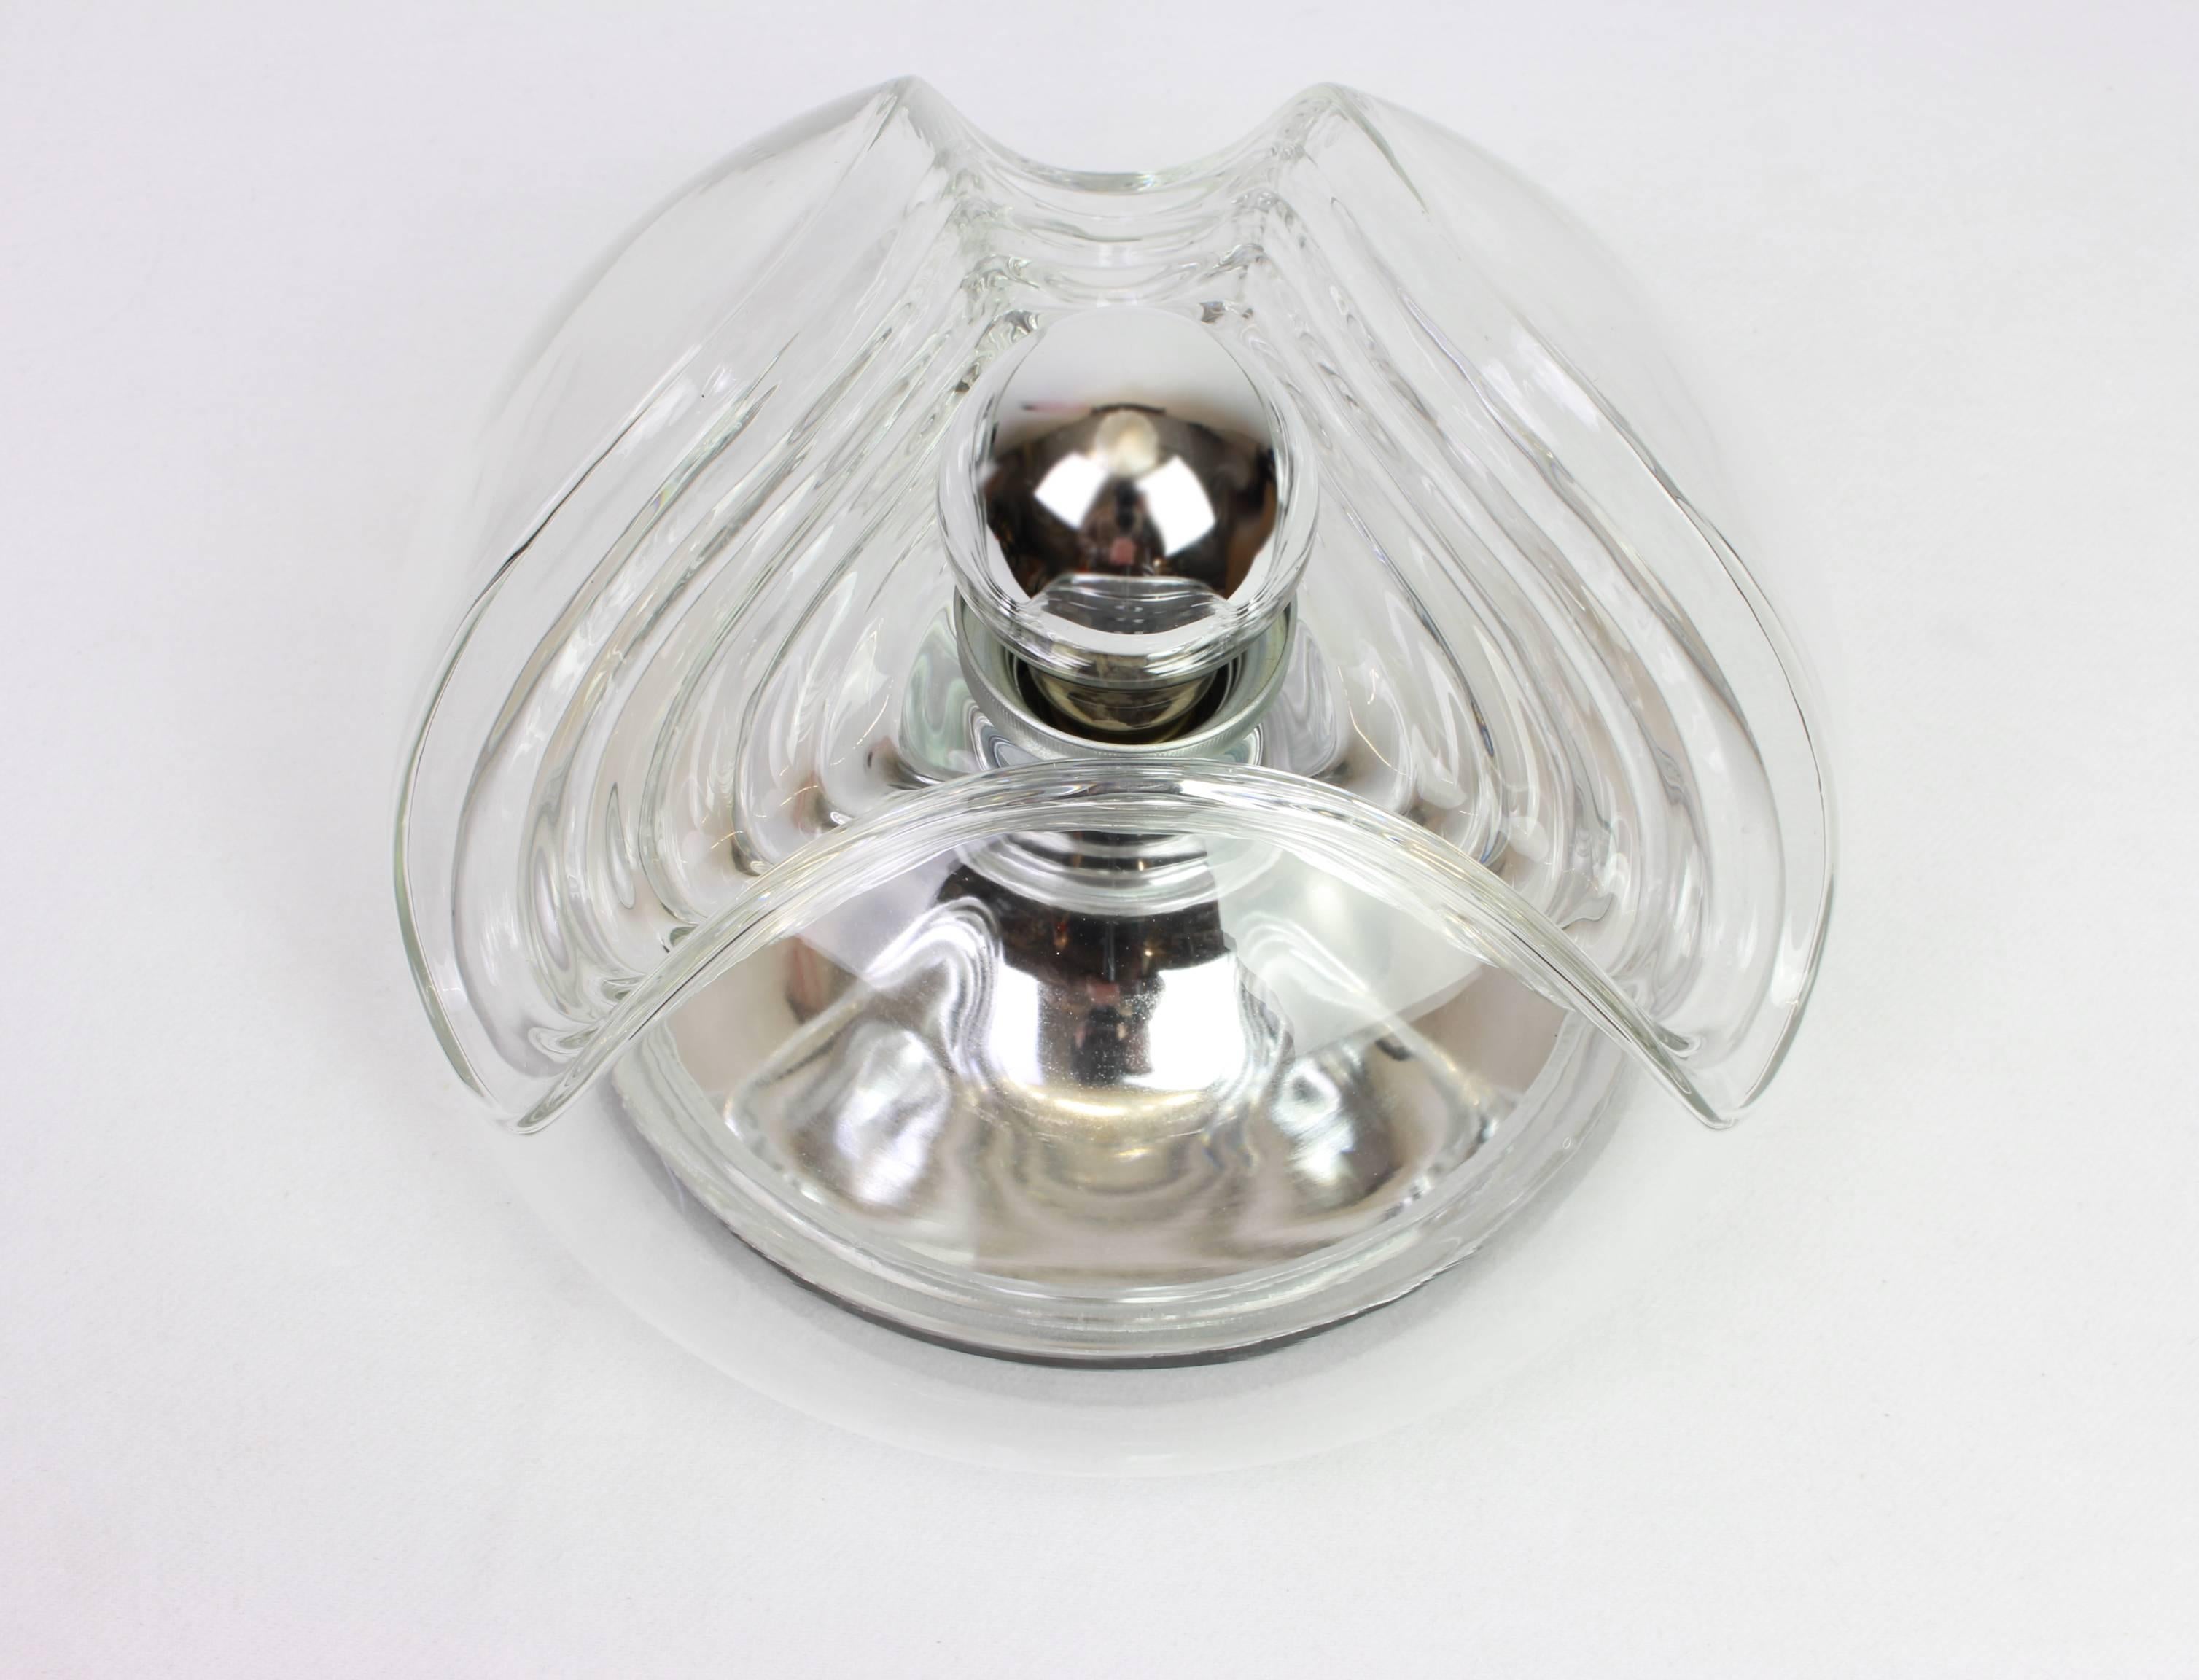 A special round biomorphic clear glass wall sconce or flush mount designed by Koch & Lowy for Peill & Putzler, manufactured in Germany, circa 1970s.

High quality and in very good condition. Cleaned, well-wired and ready to use. 

Each fixture